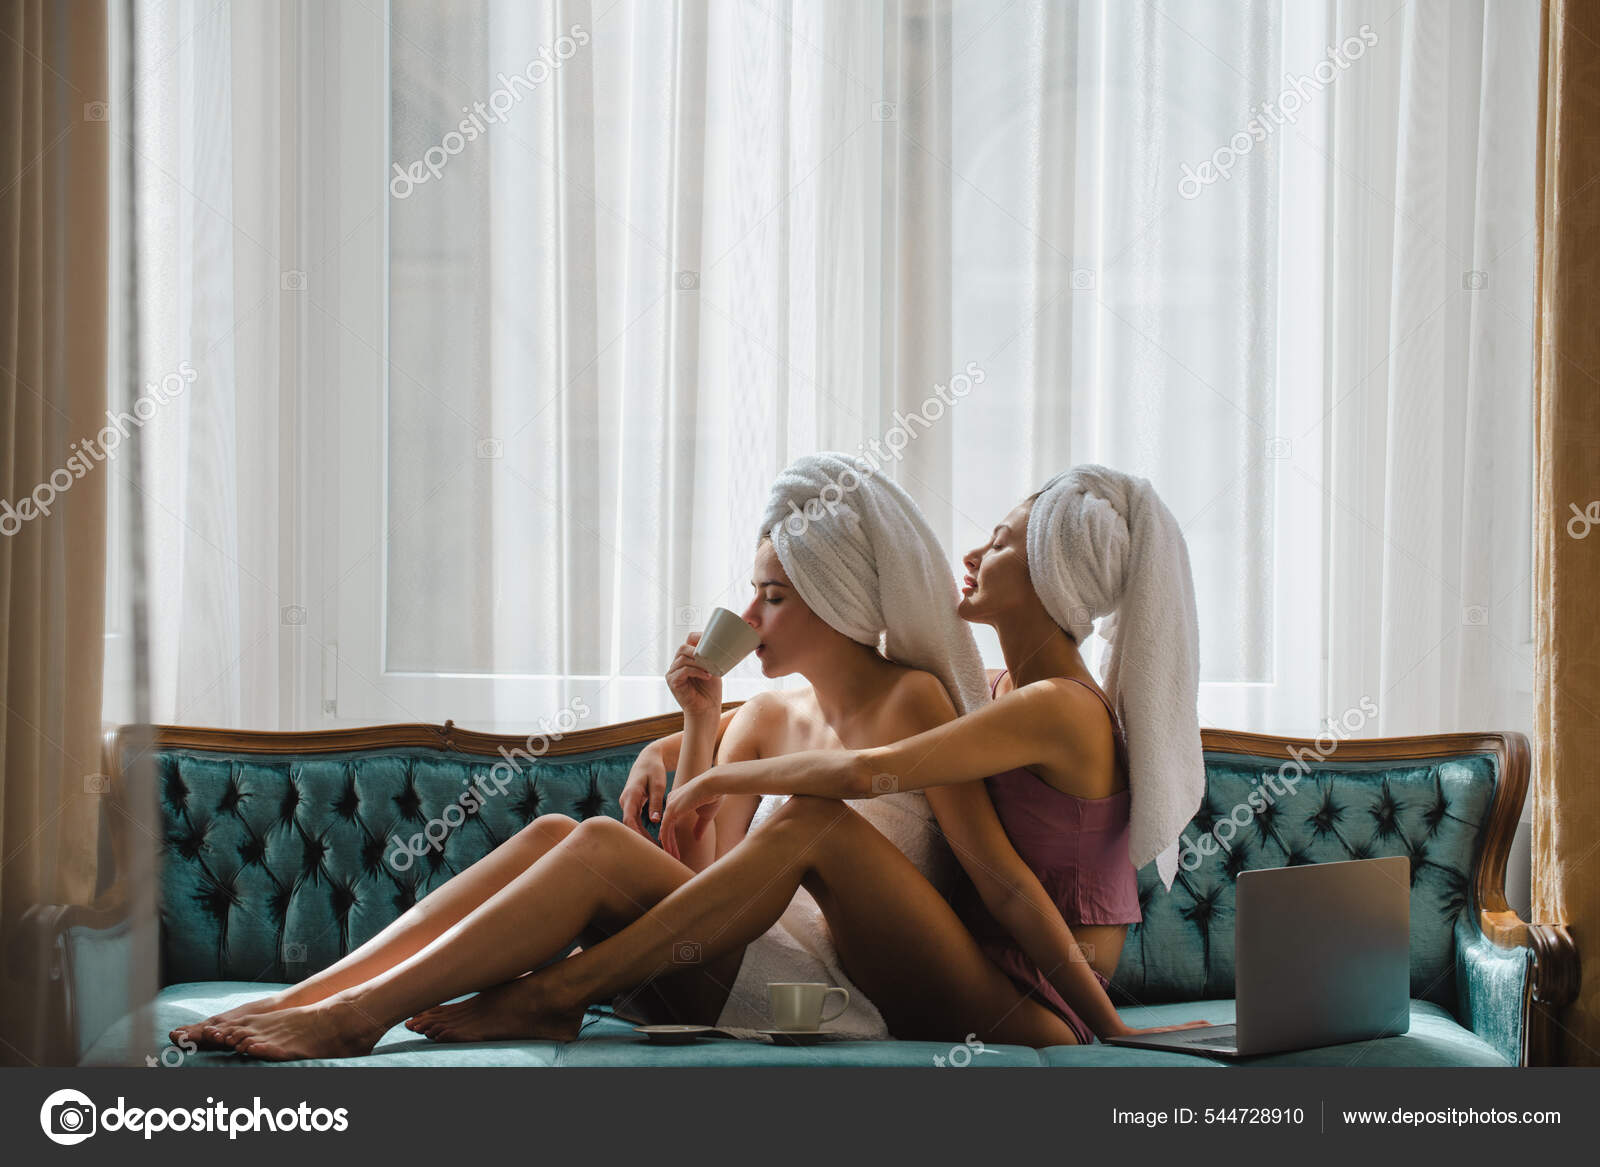 Loving lesbian couple girls drinking coffee embrace on bed. Sexy girlfriends in love at home spend morning together pic